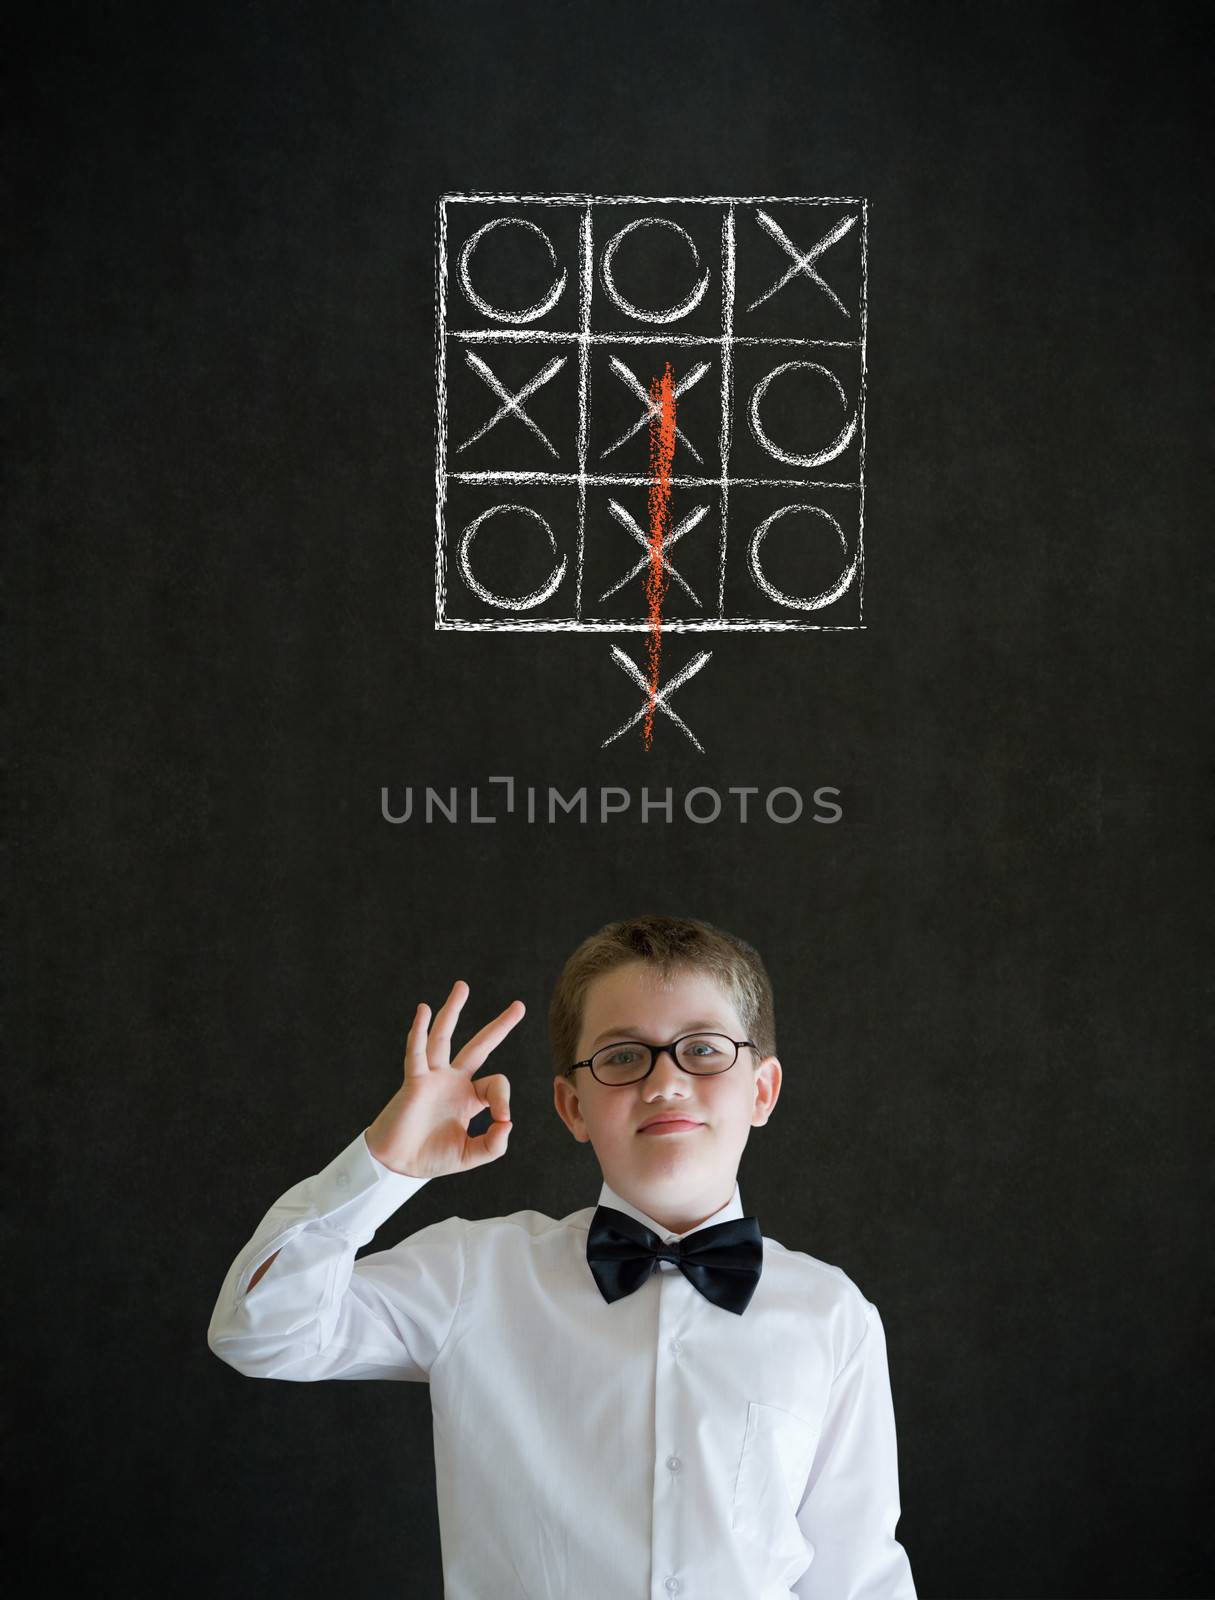 All ok or okay sign boy dressed up as business man with thinking out of the box tic tac toe concept on blackboard background